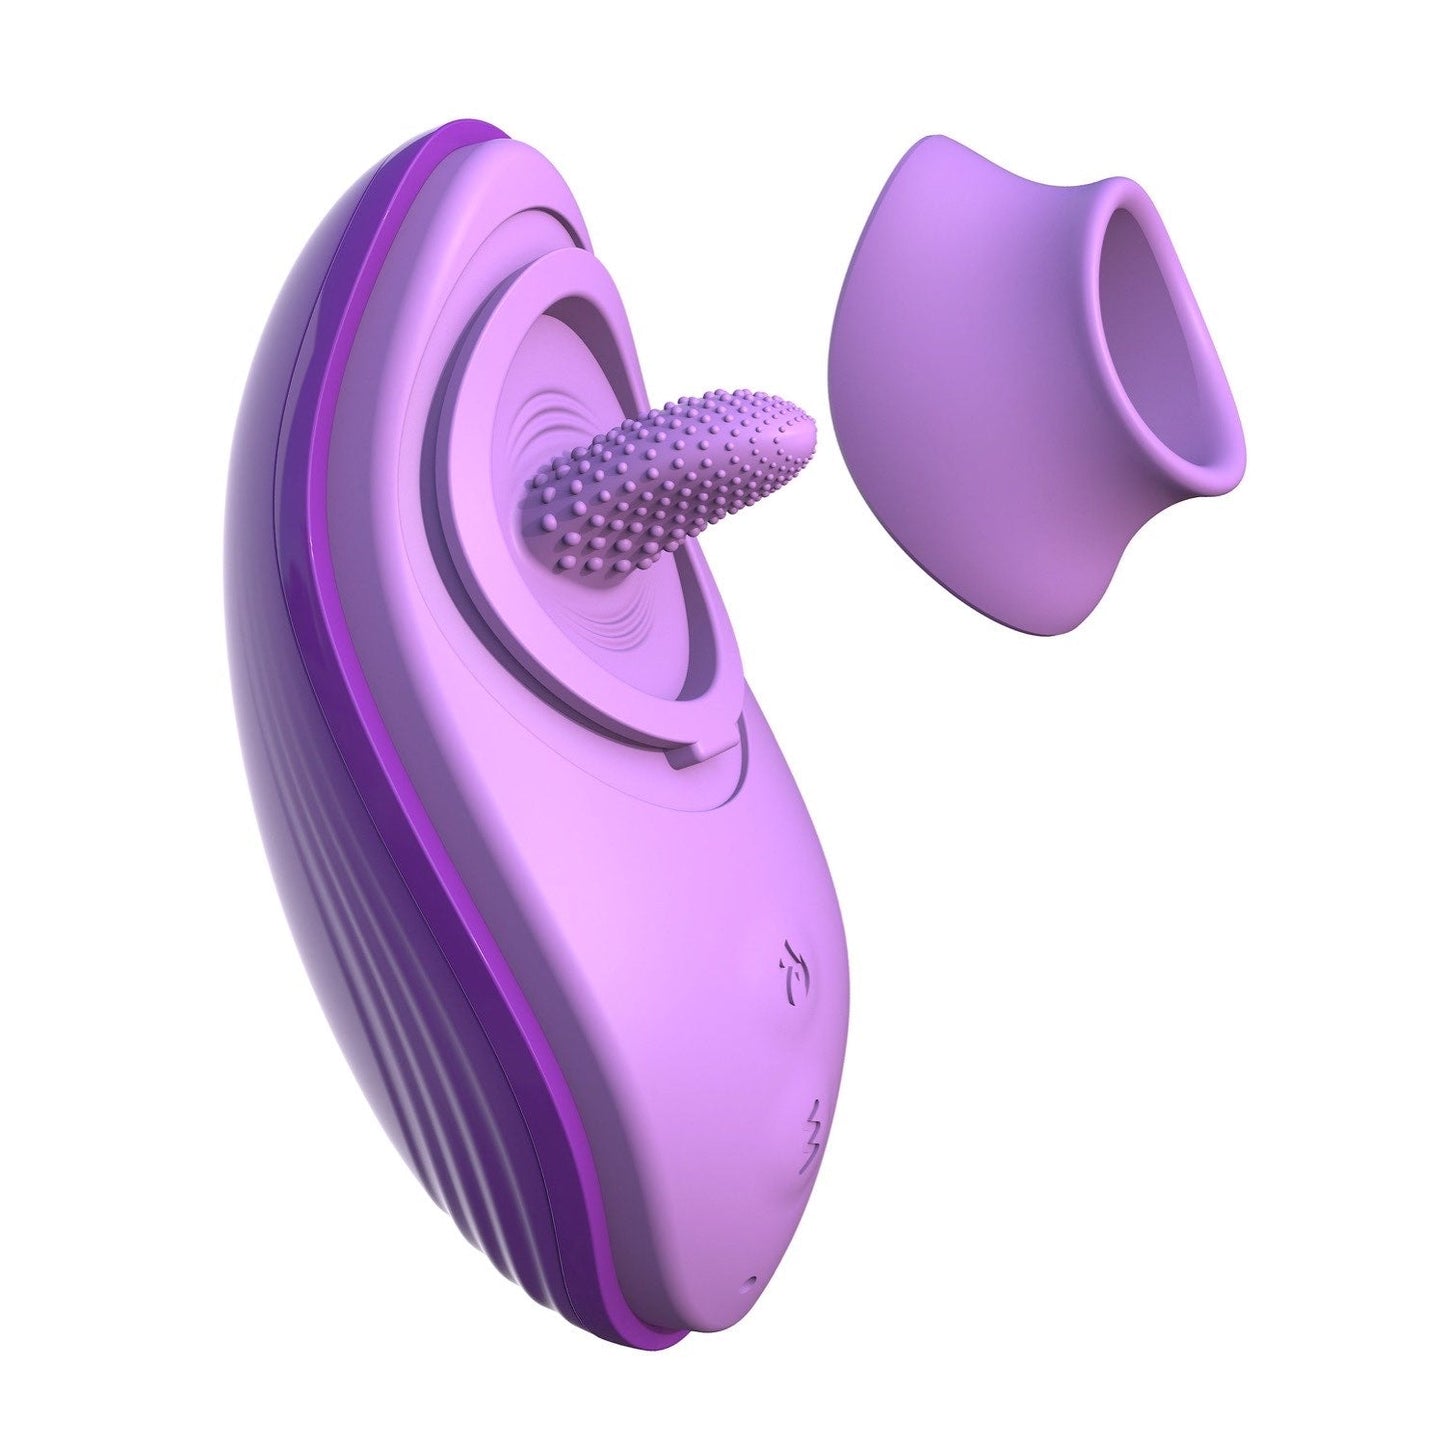 Silicone Fun Tongue - Purple USB Rechargeable Flicking Stimulator